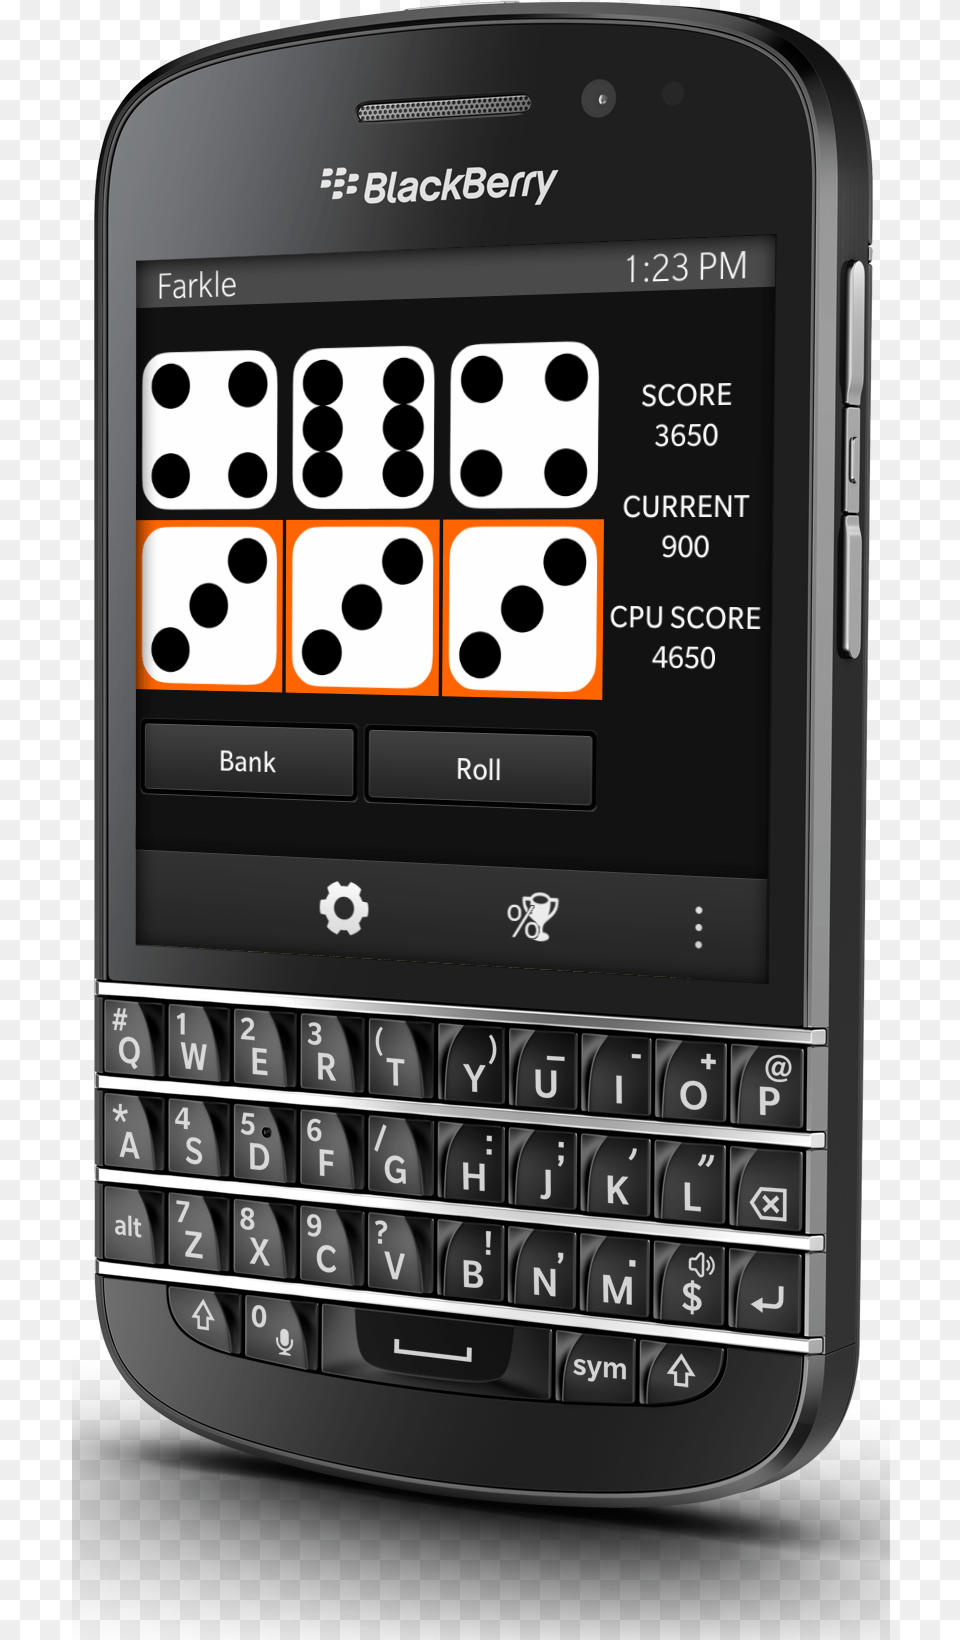 Farkle Updated For Blackberry 10 Blackberry Phone, Electronics, Mobile Phone Png Image